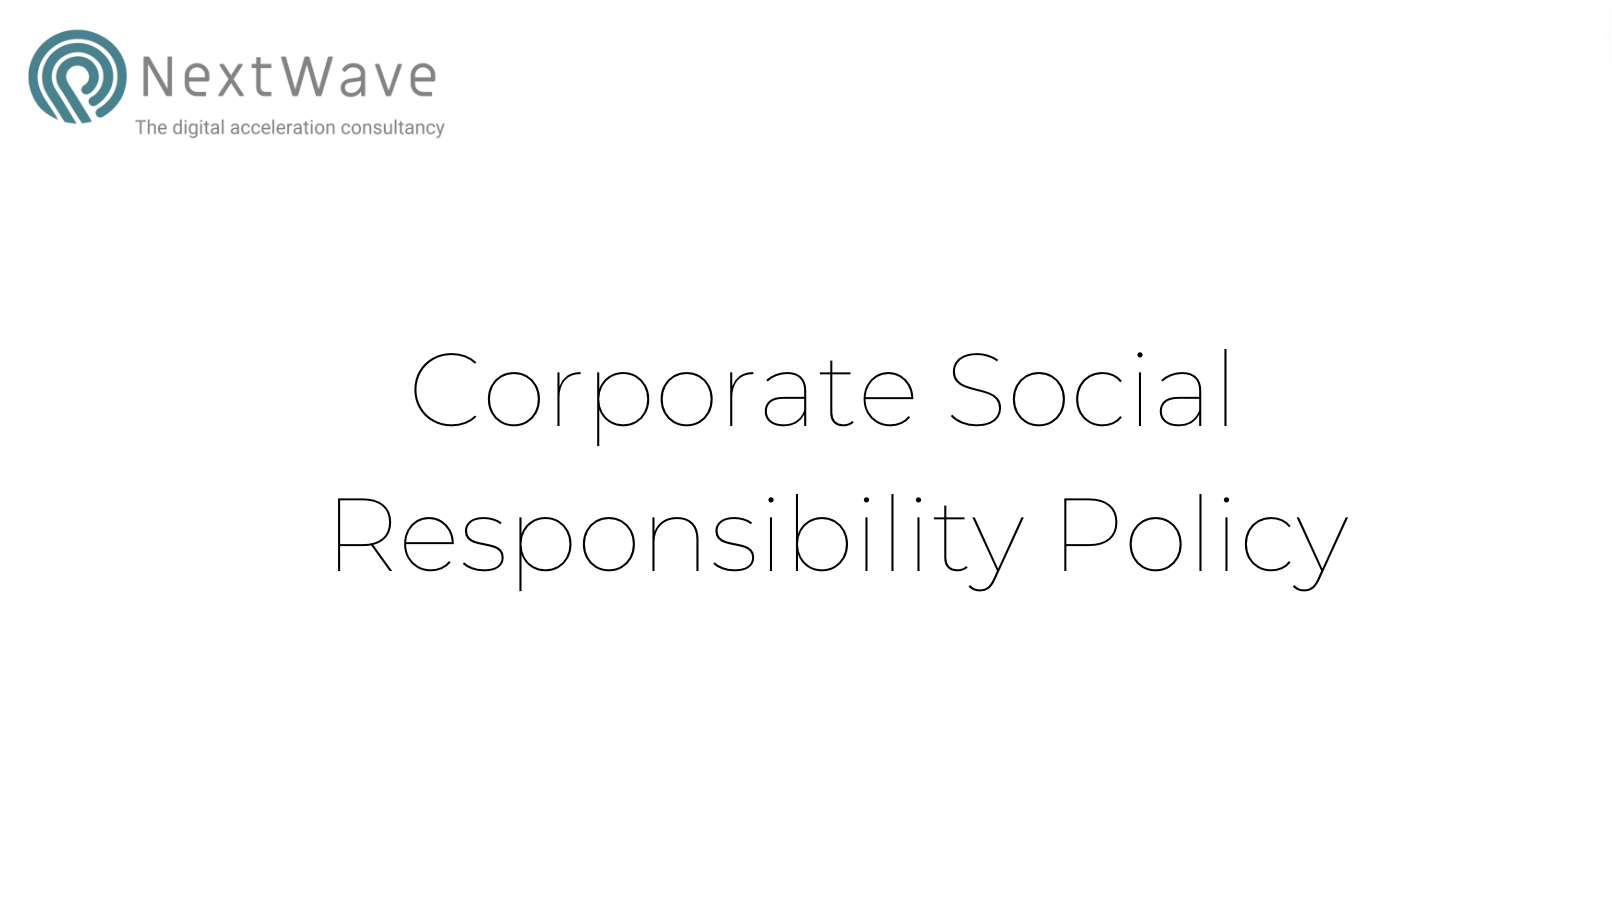 NextWave Policies – Corporate Social Responsibility Policy